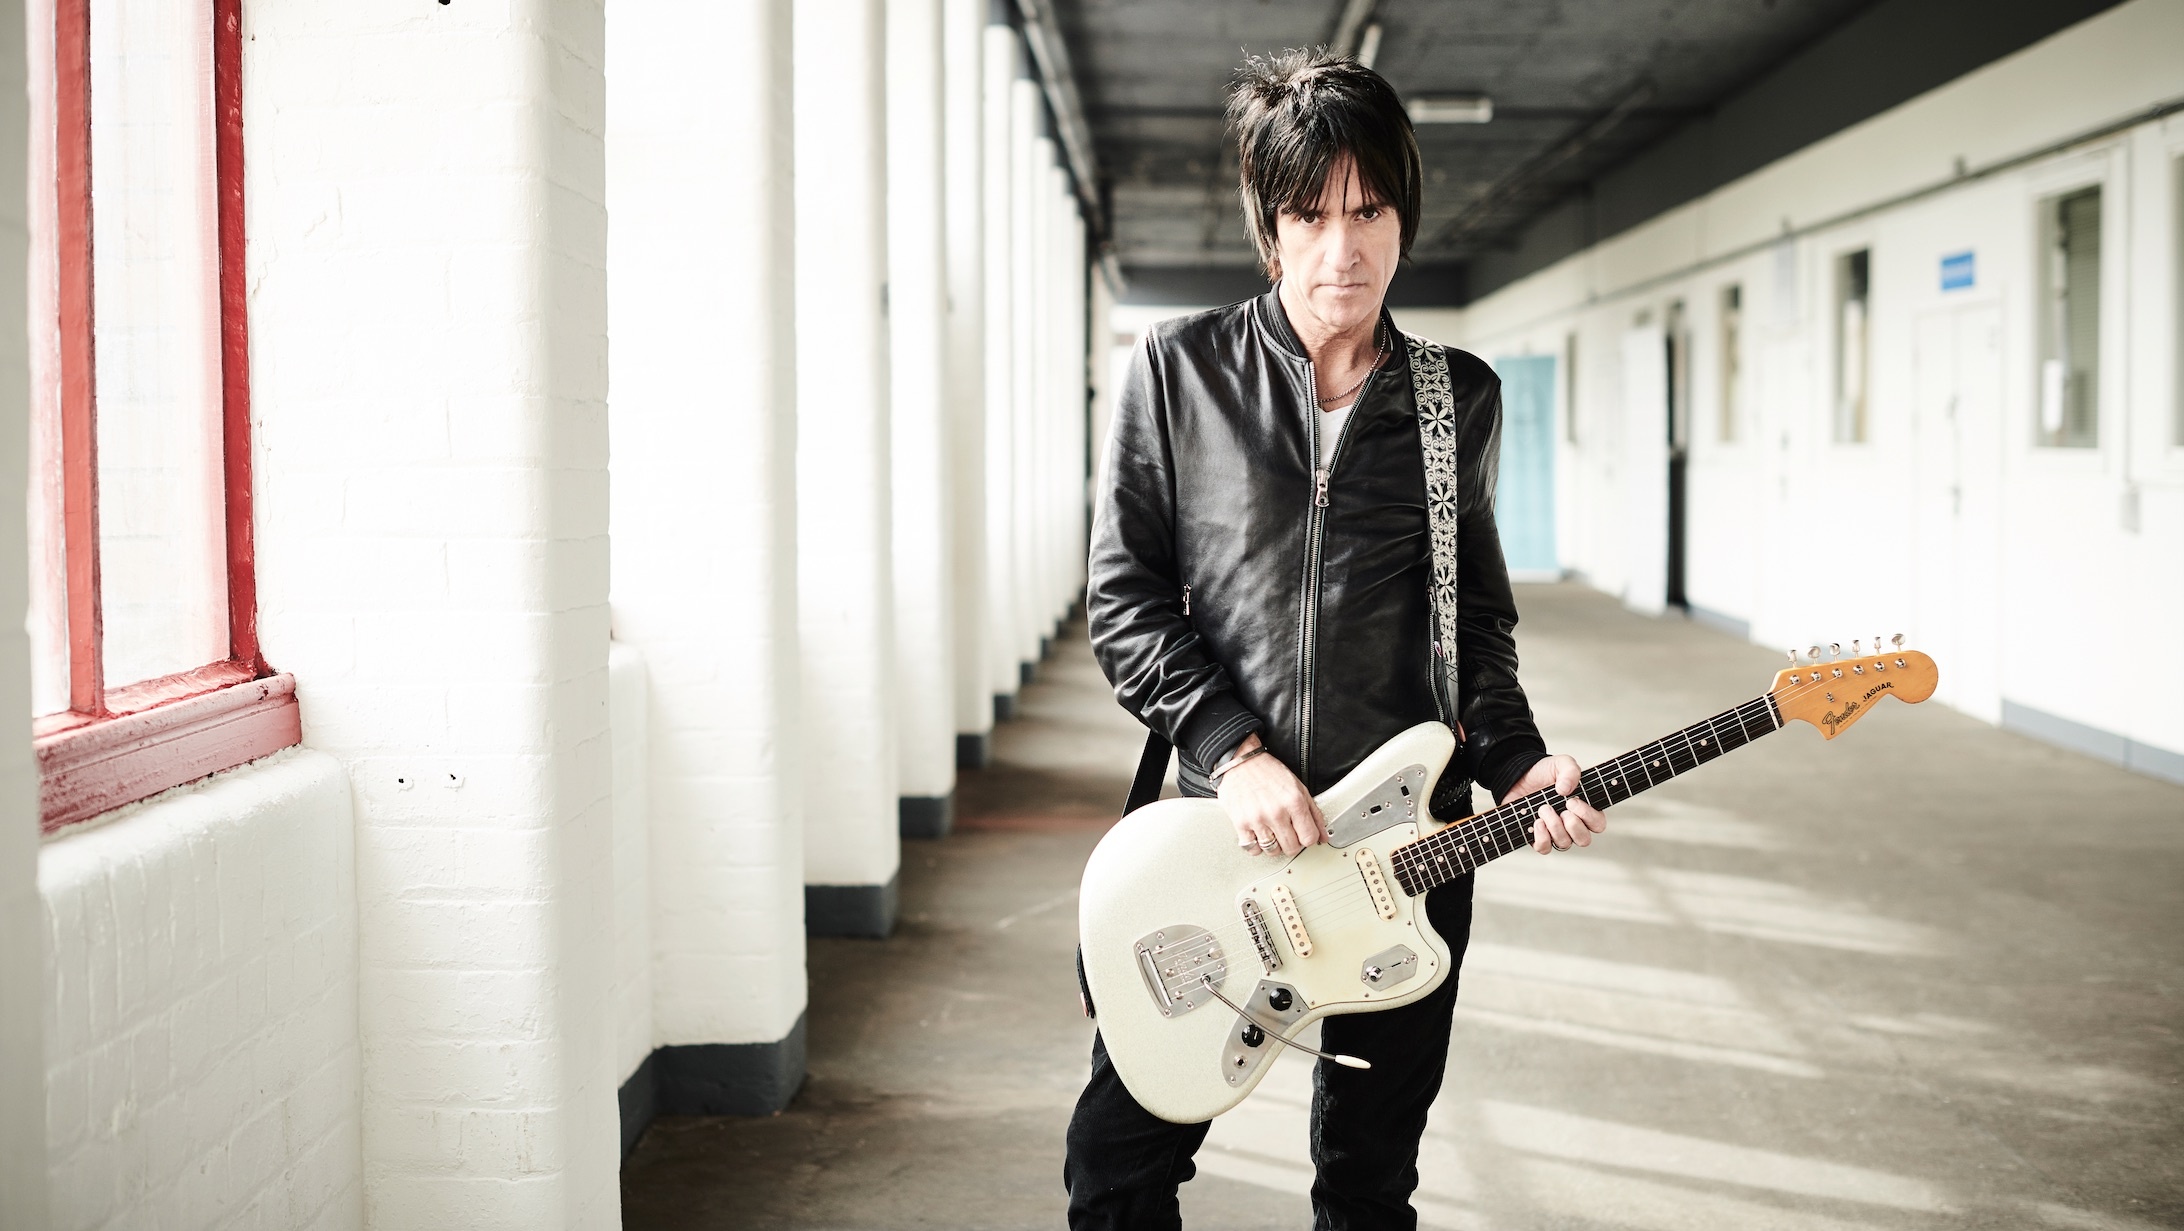 Johnny Marr, Instagram guitar lessons, Smiths classics, Stay-at-home inspiration, 2190x1240 HD Desktop